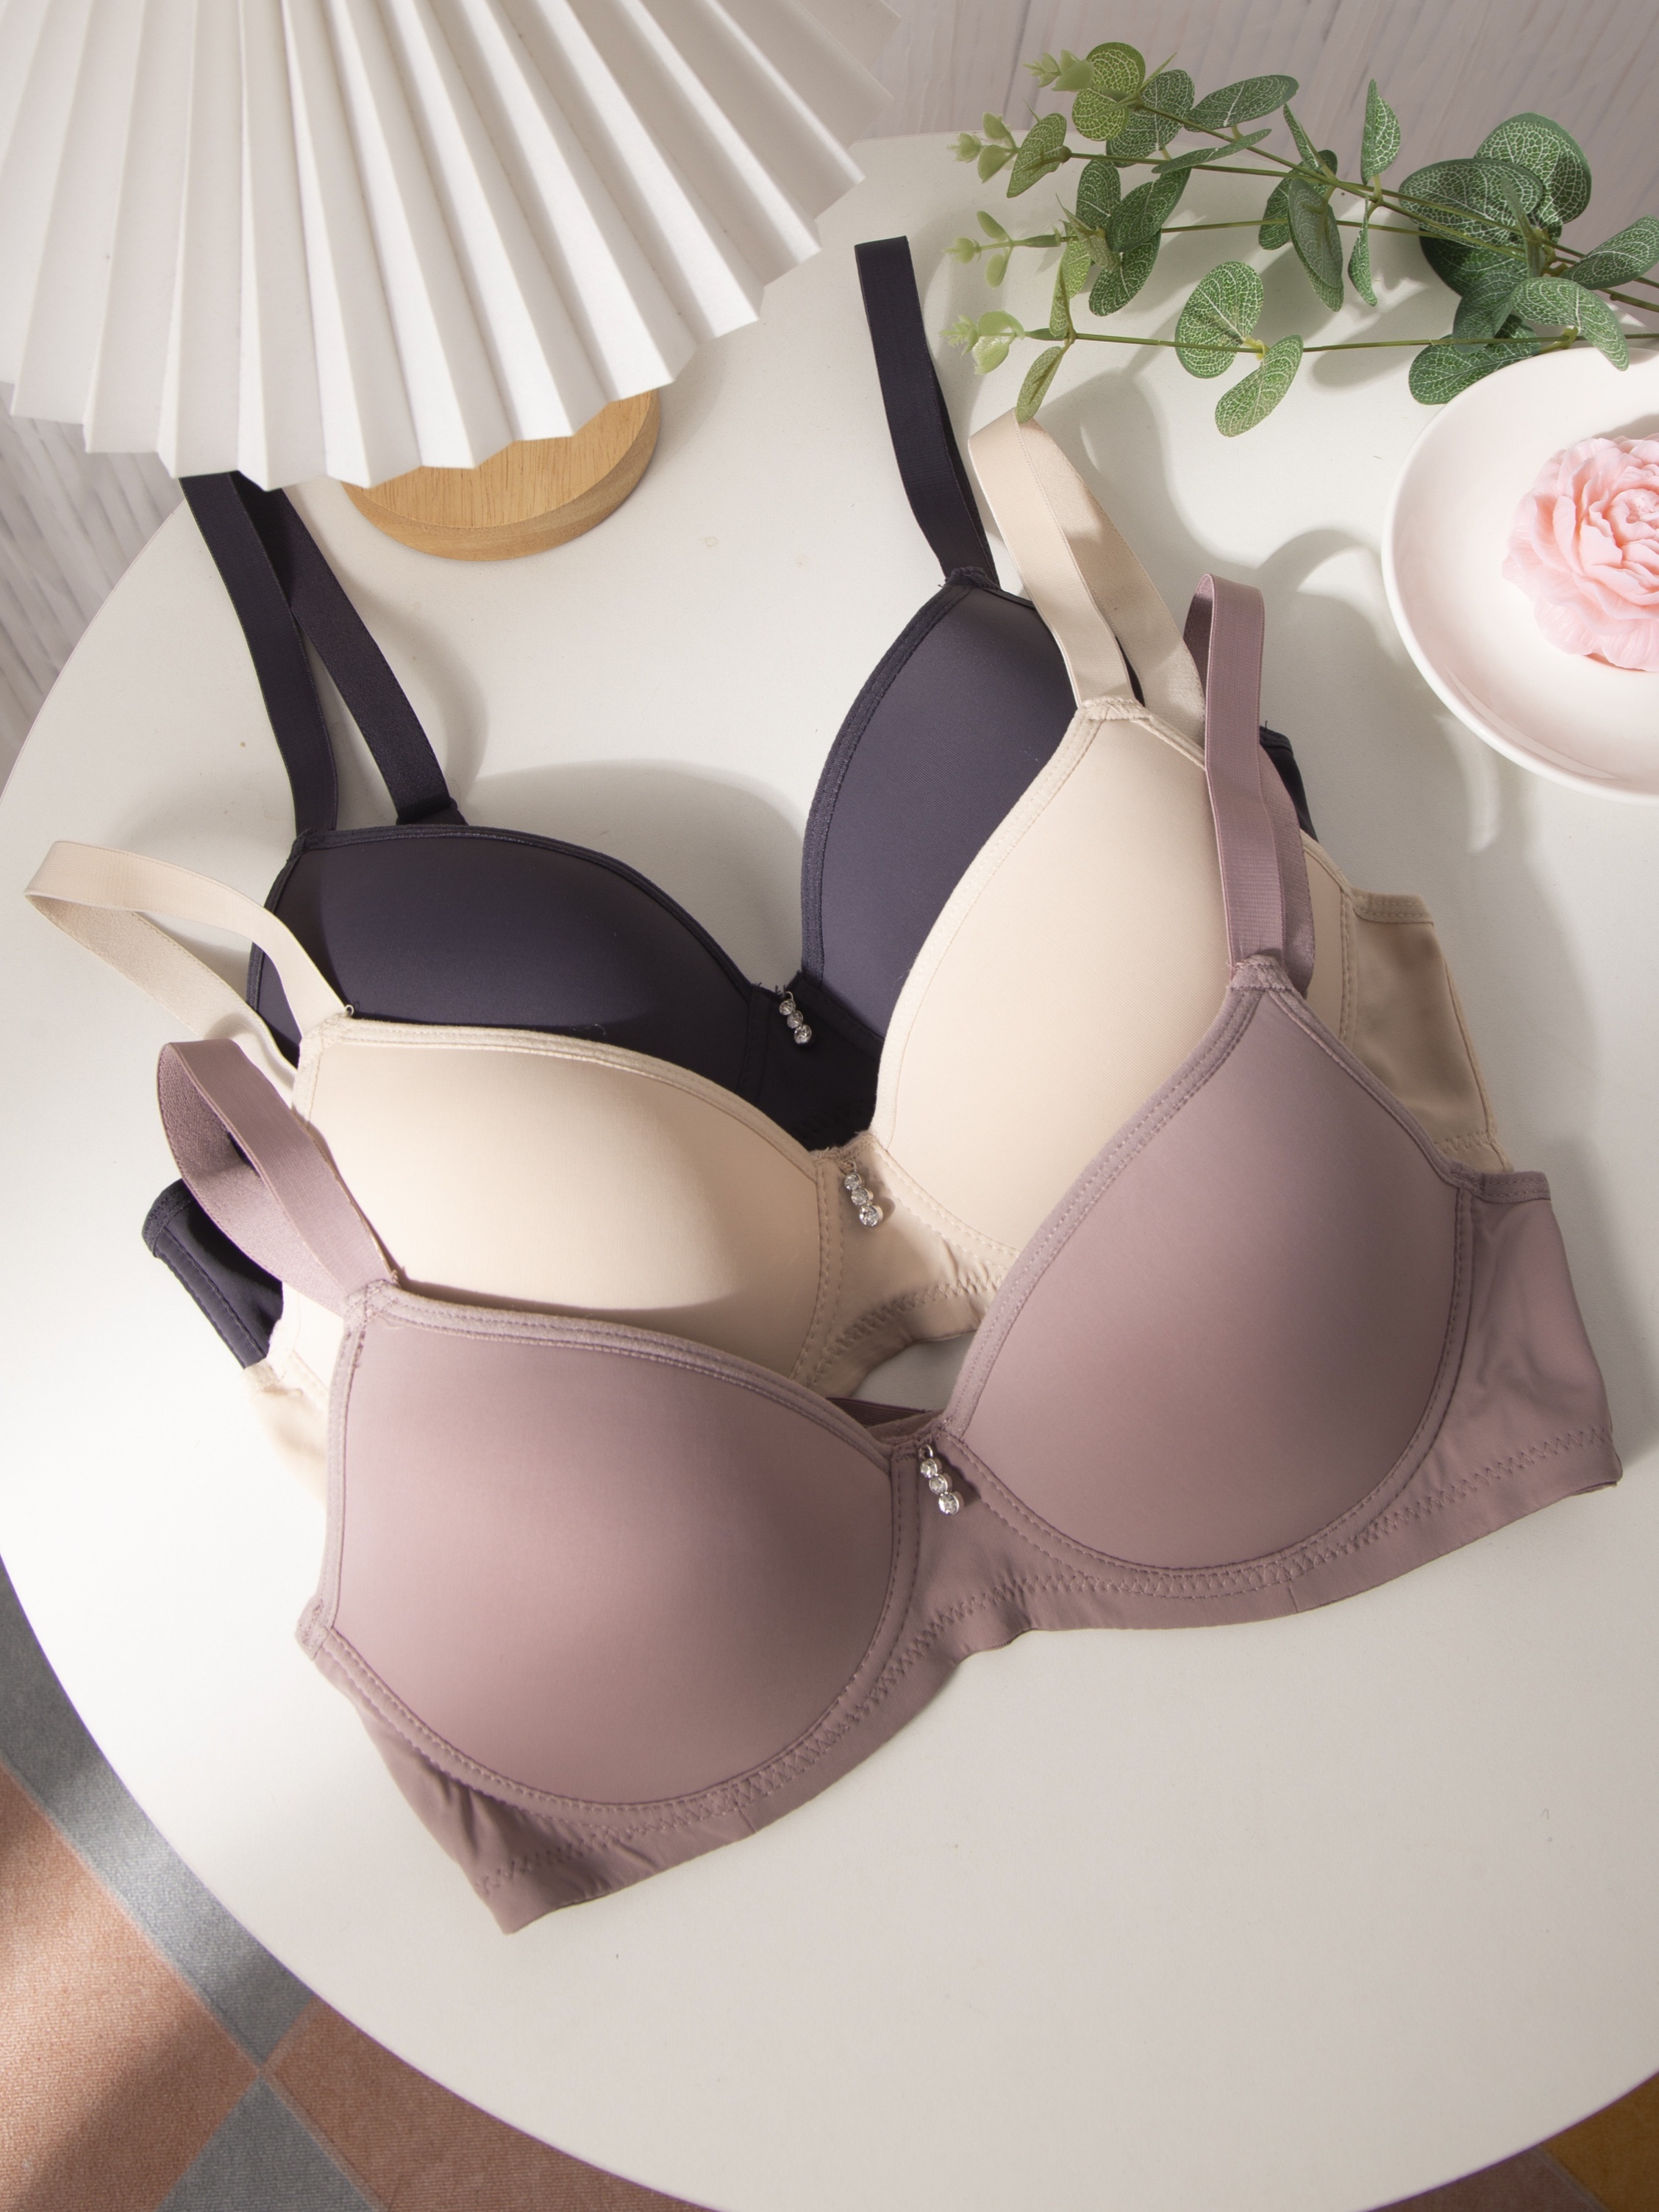 LF [BR19435] MIVERNA TEENAGE SUPPORT BRA COTTON BLEND NON WIRED SIZE 32A,  34A, 36A, 38A, Women's Fashion, New Undergarments & Loungewear on Carousell